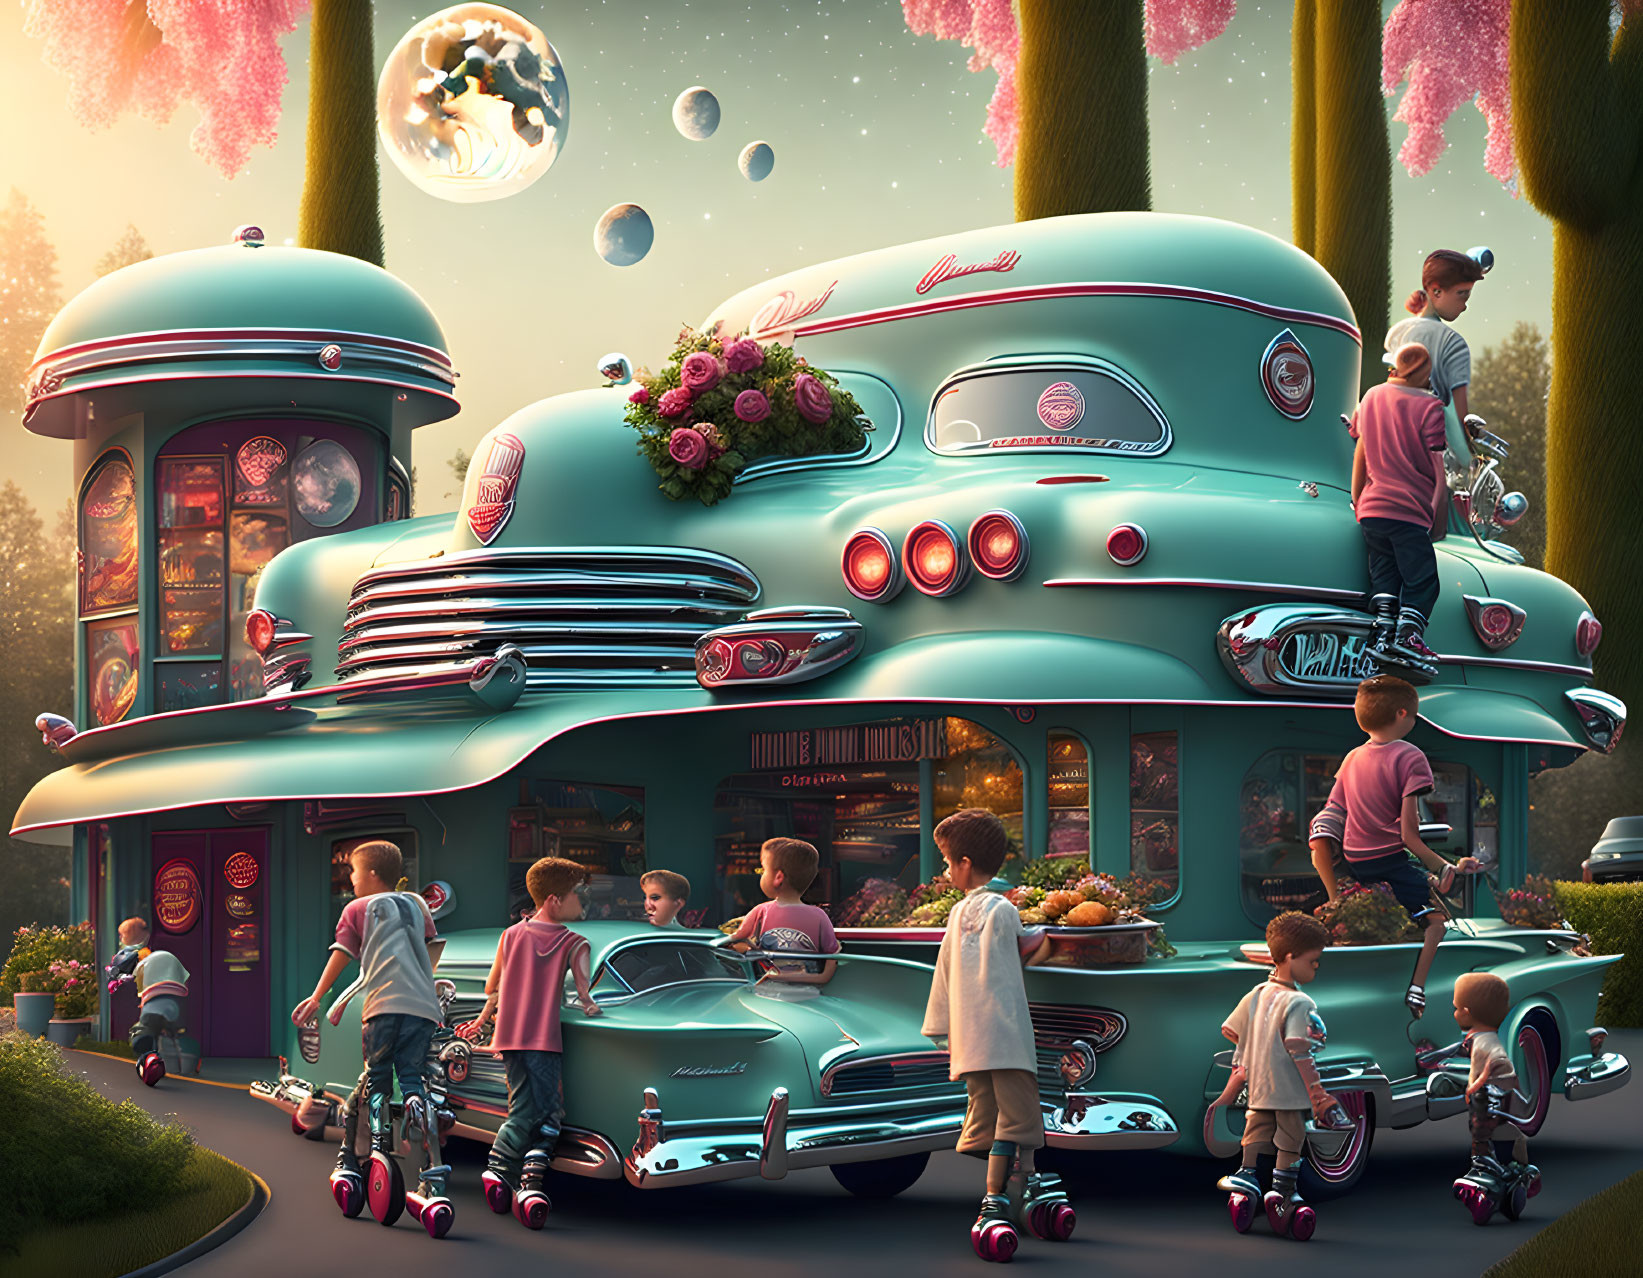 Retro-futuristic diner scene with vintage cars, moon, planets, and pink-flowered trees